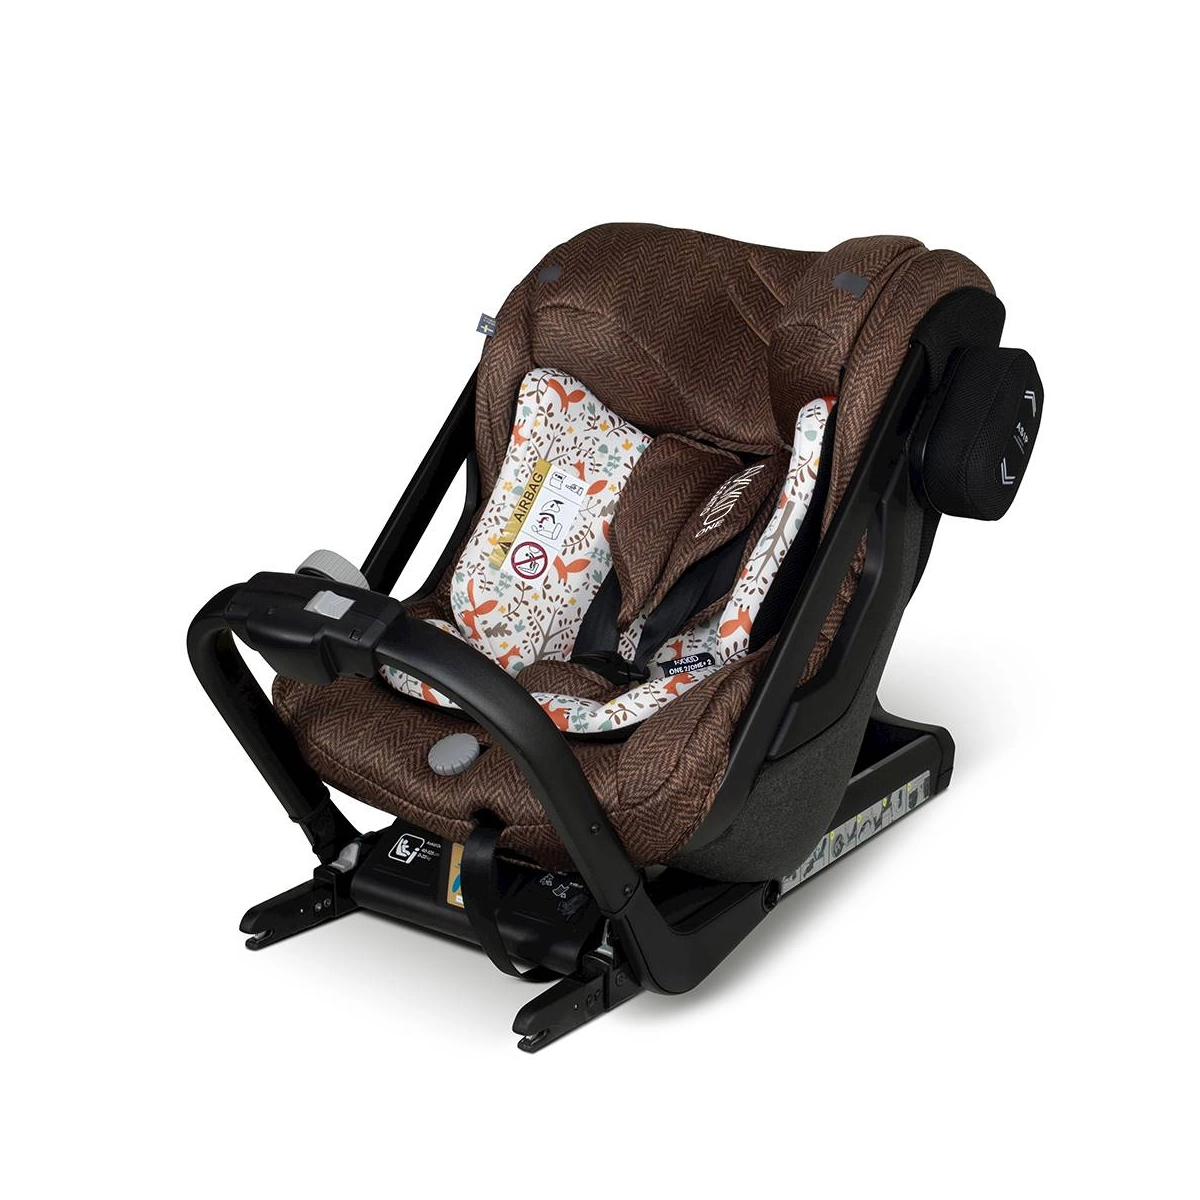 Cosatto x Axkid One 2 Isofix Group 1/2/3 Car Seat